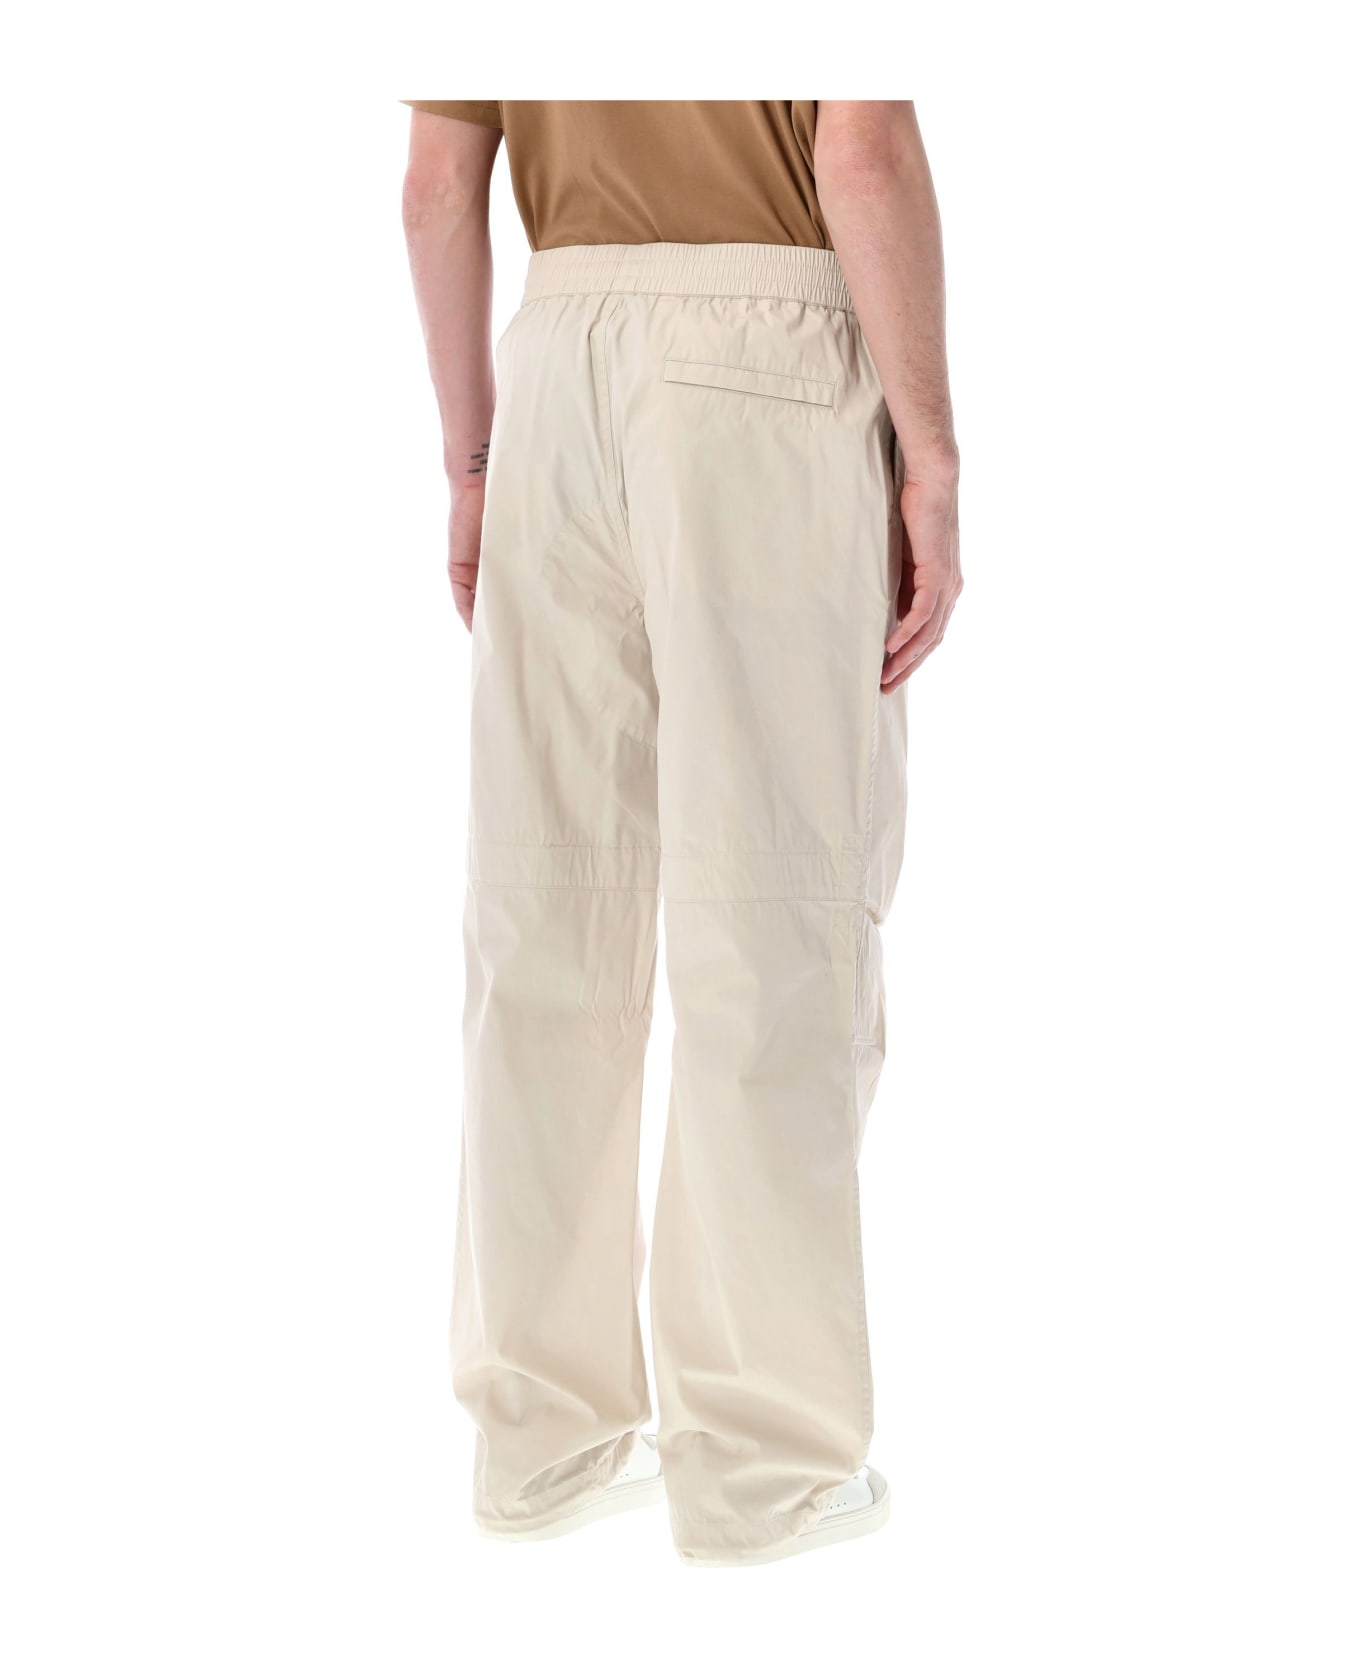 Burberry London Cargo Trousers - WHEAT